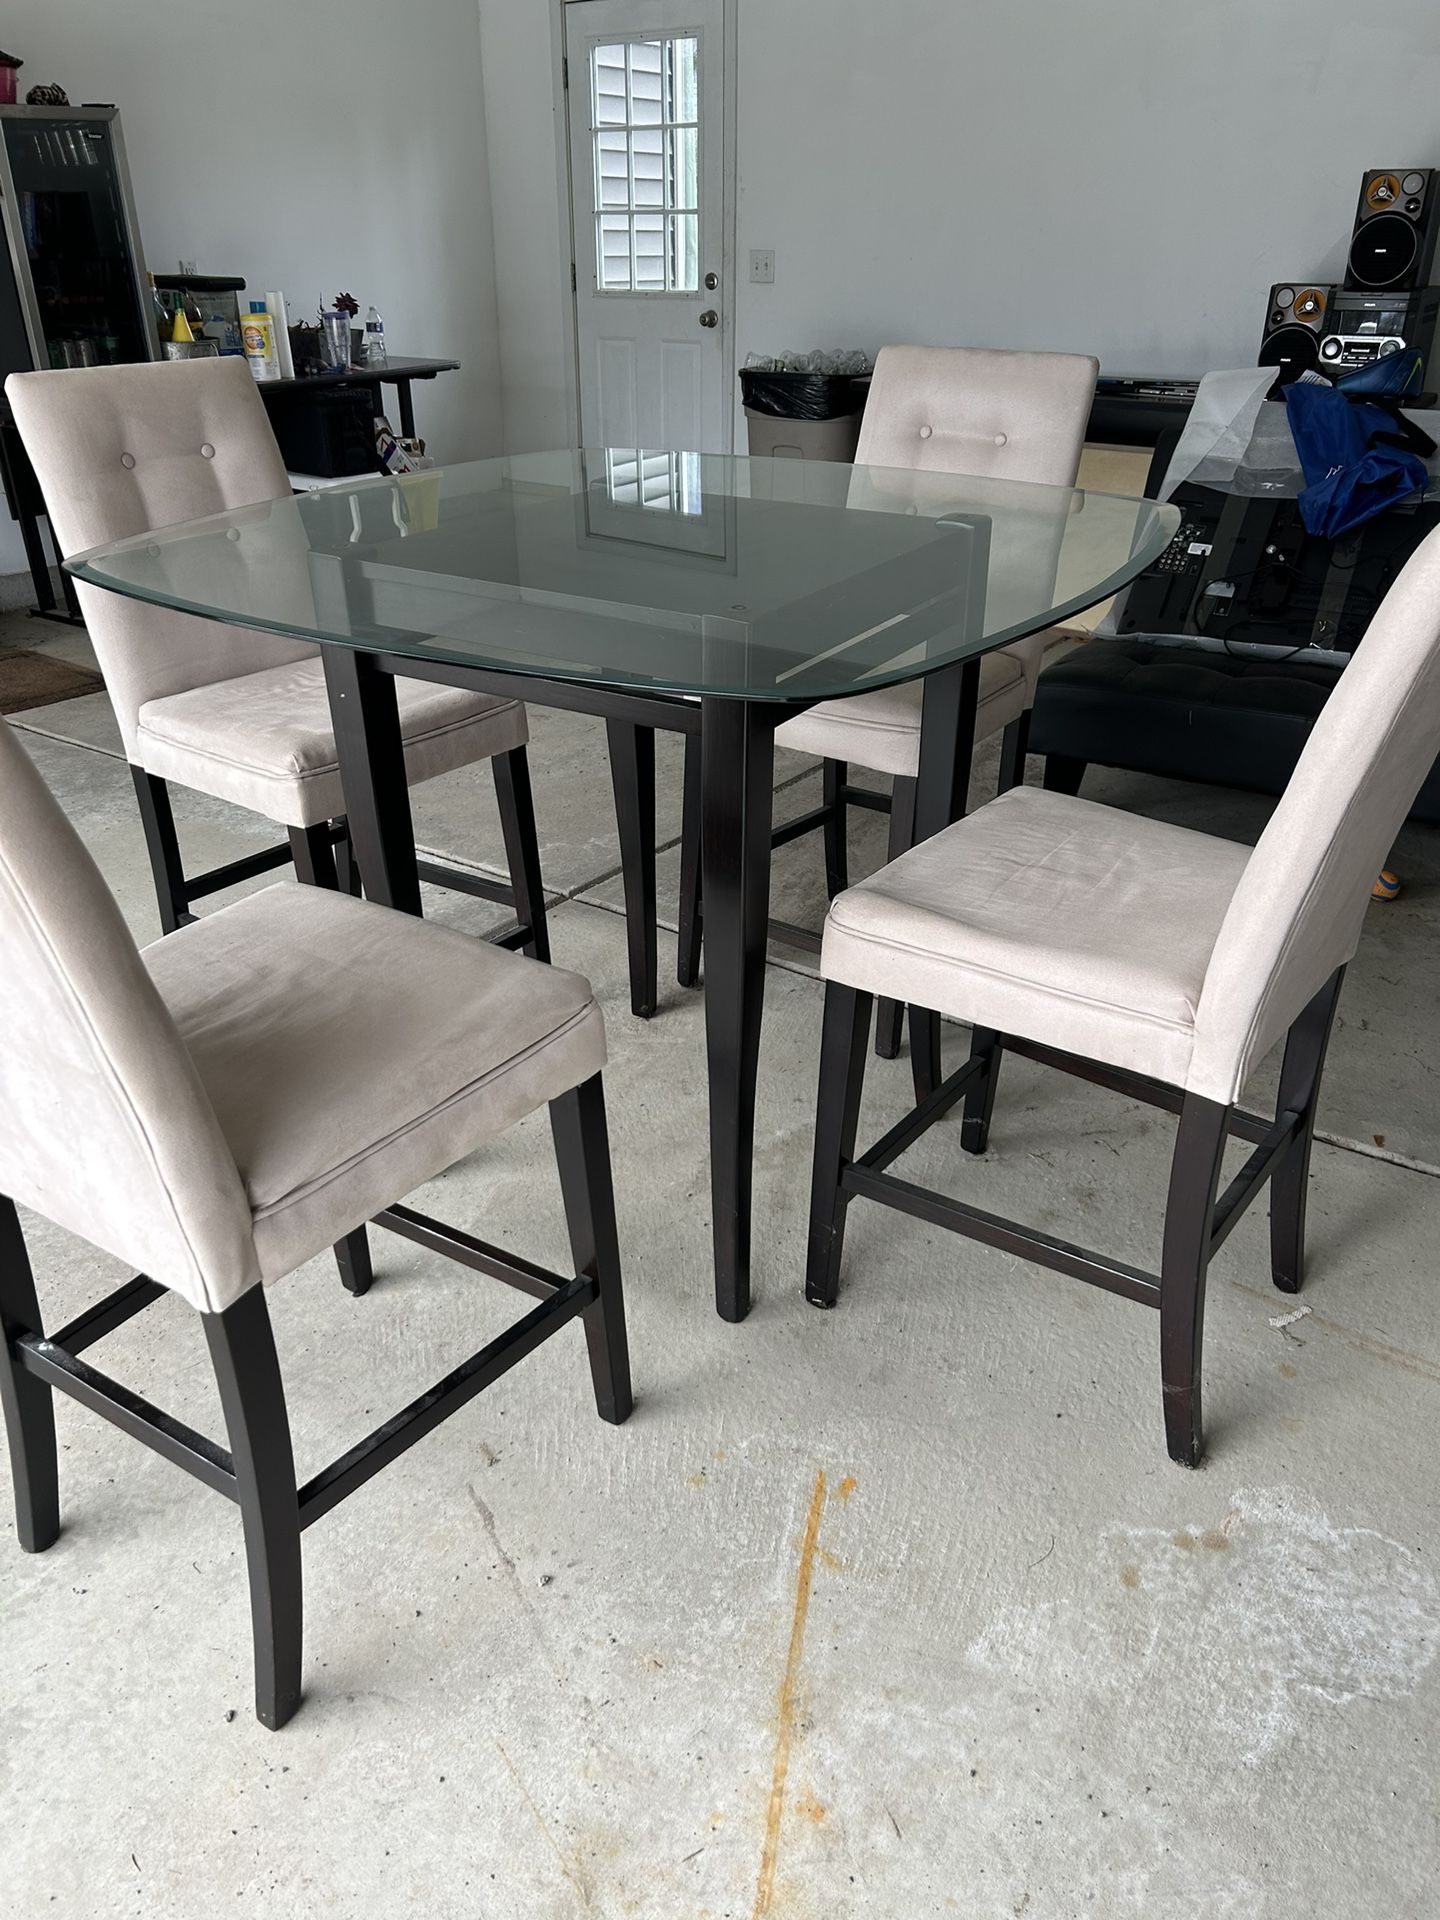 4 Seat Glass Table Top Dining Set 